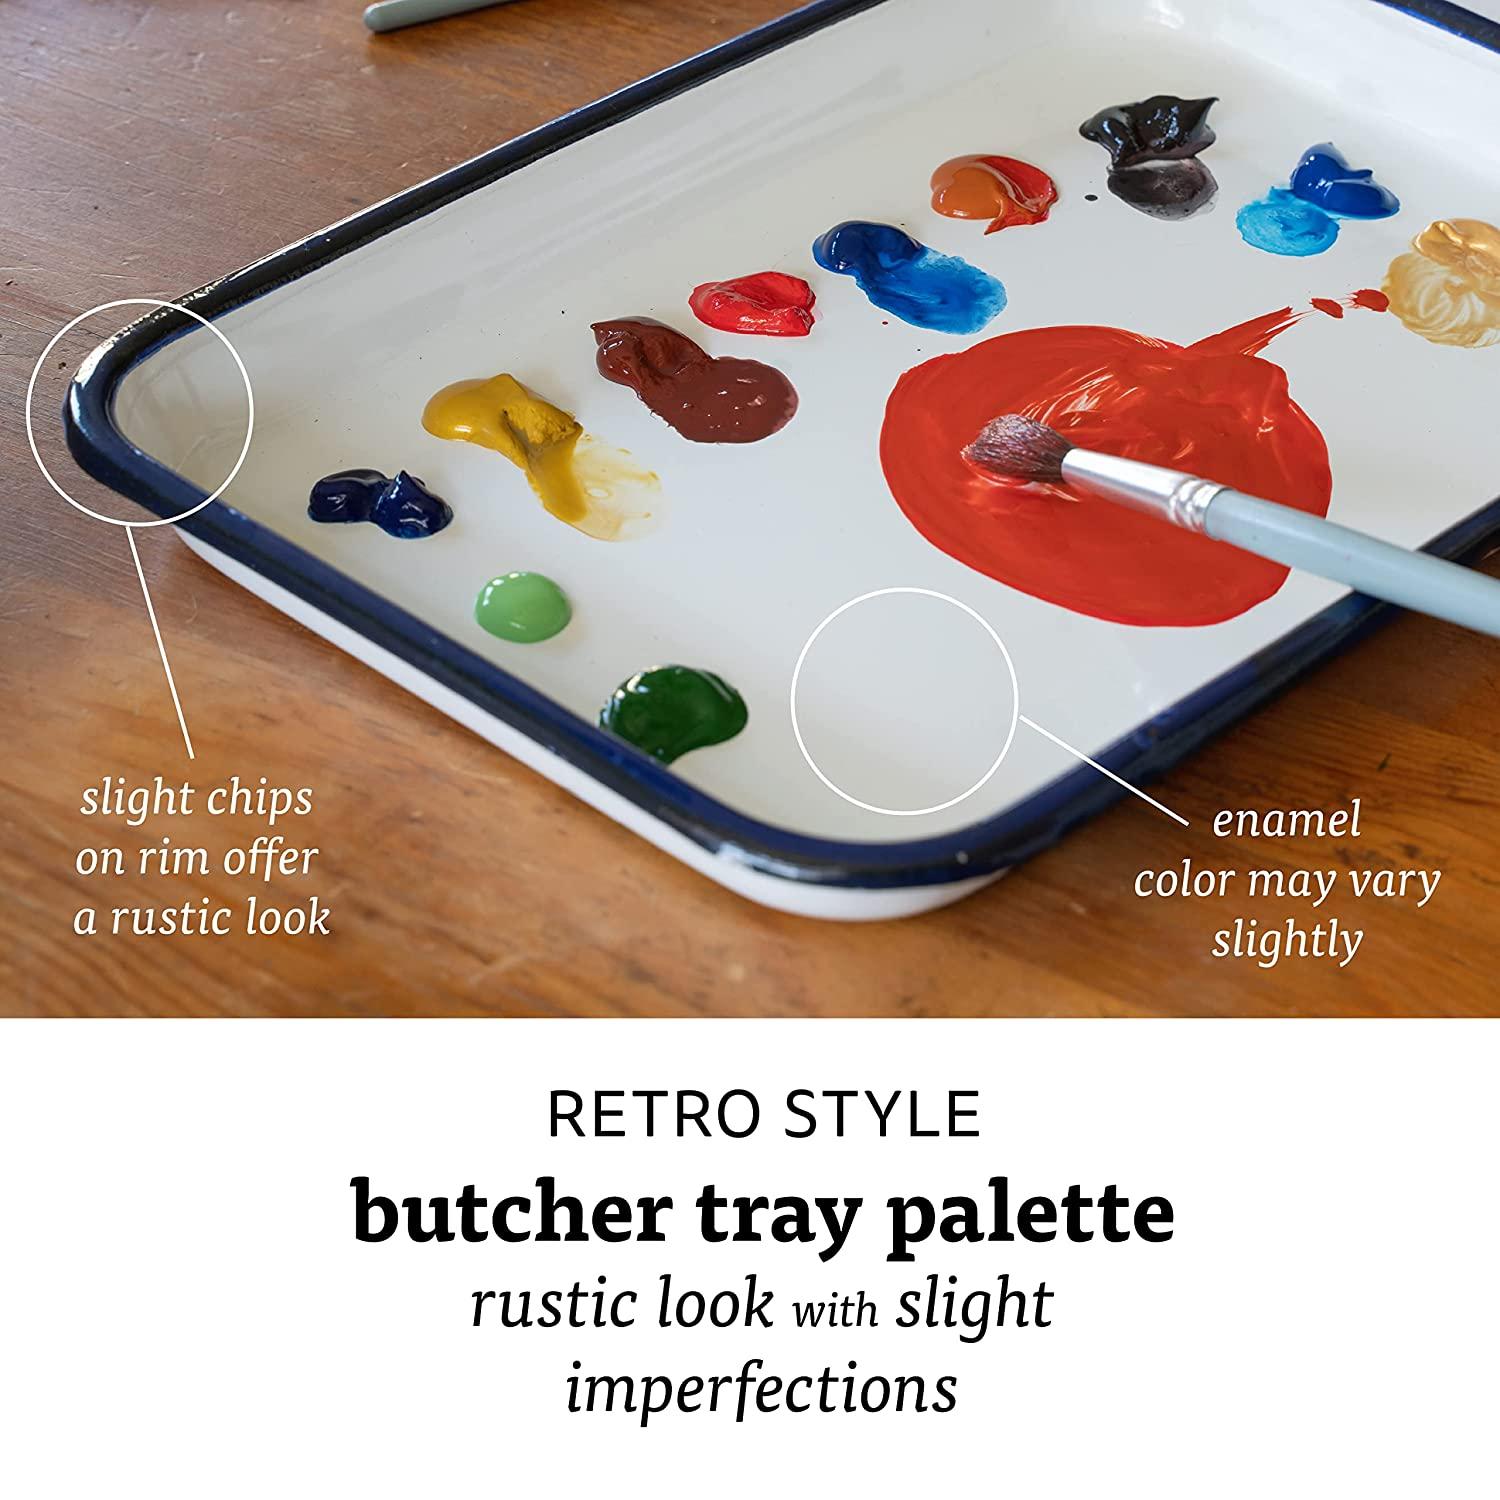 THE BEST PALETTE FOR PAINTING EVER! Why I love the butcher tray